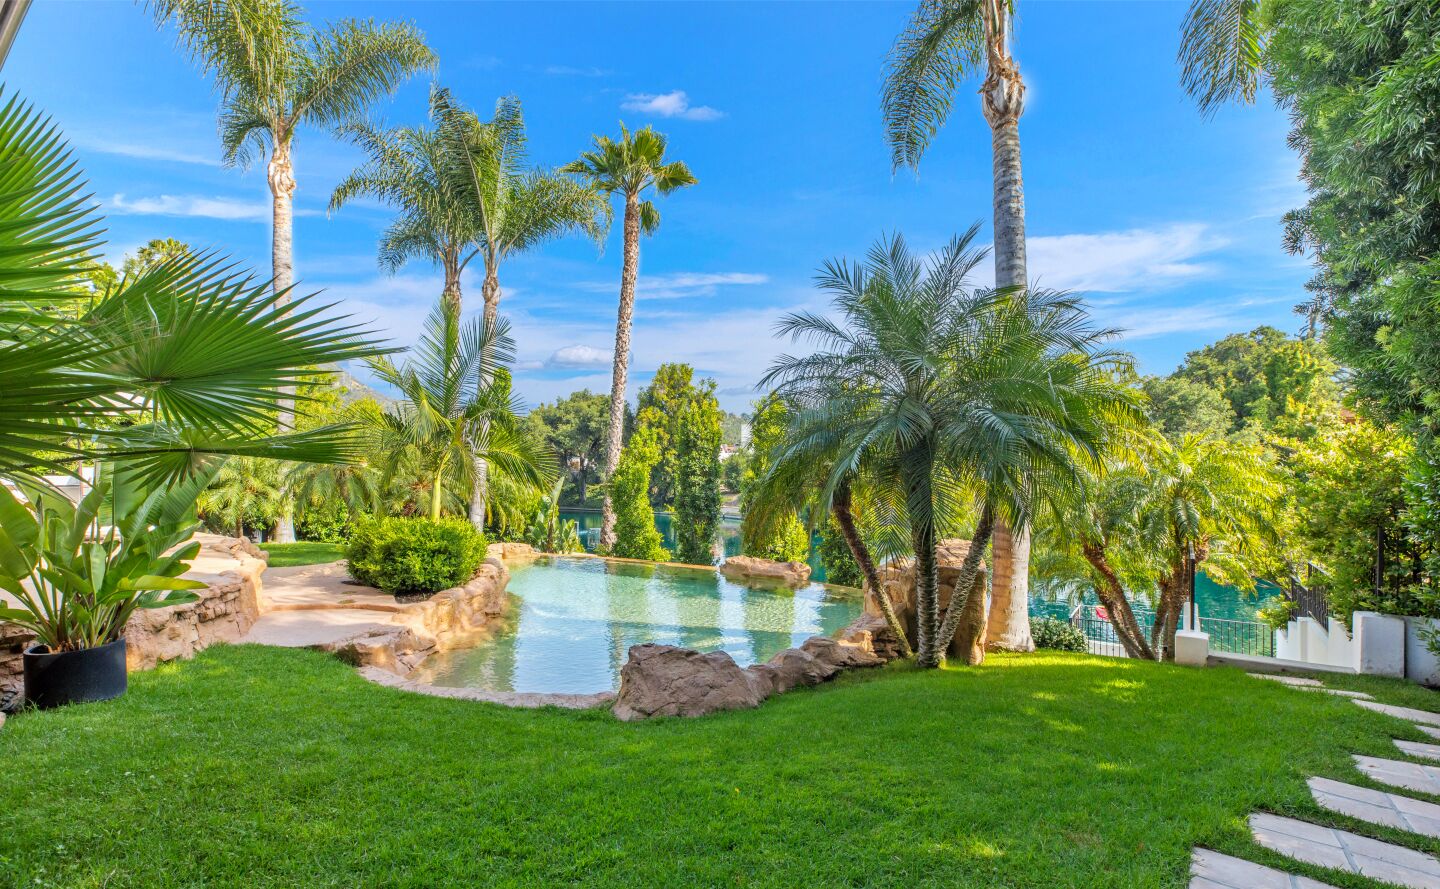 The pool surrounded by palm trees and grass